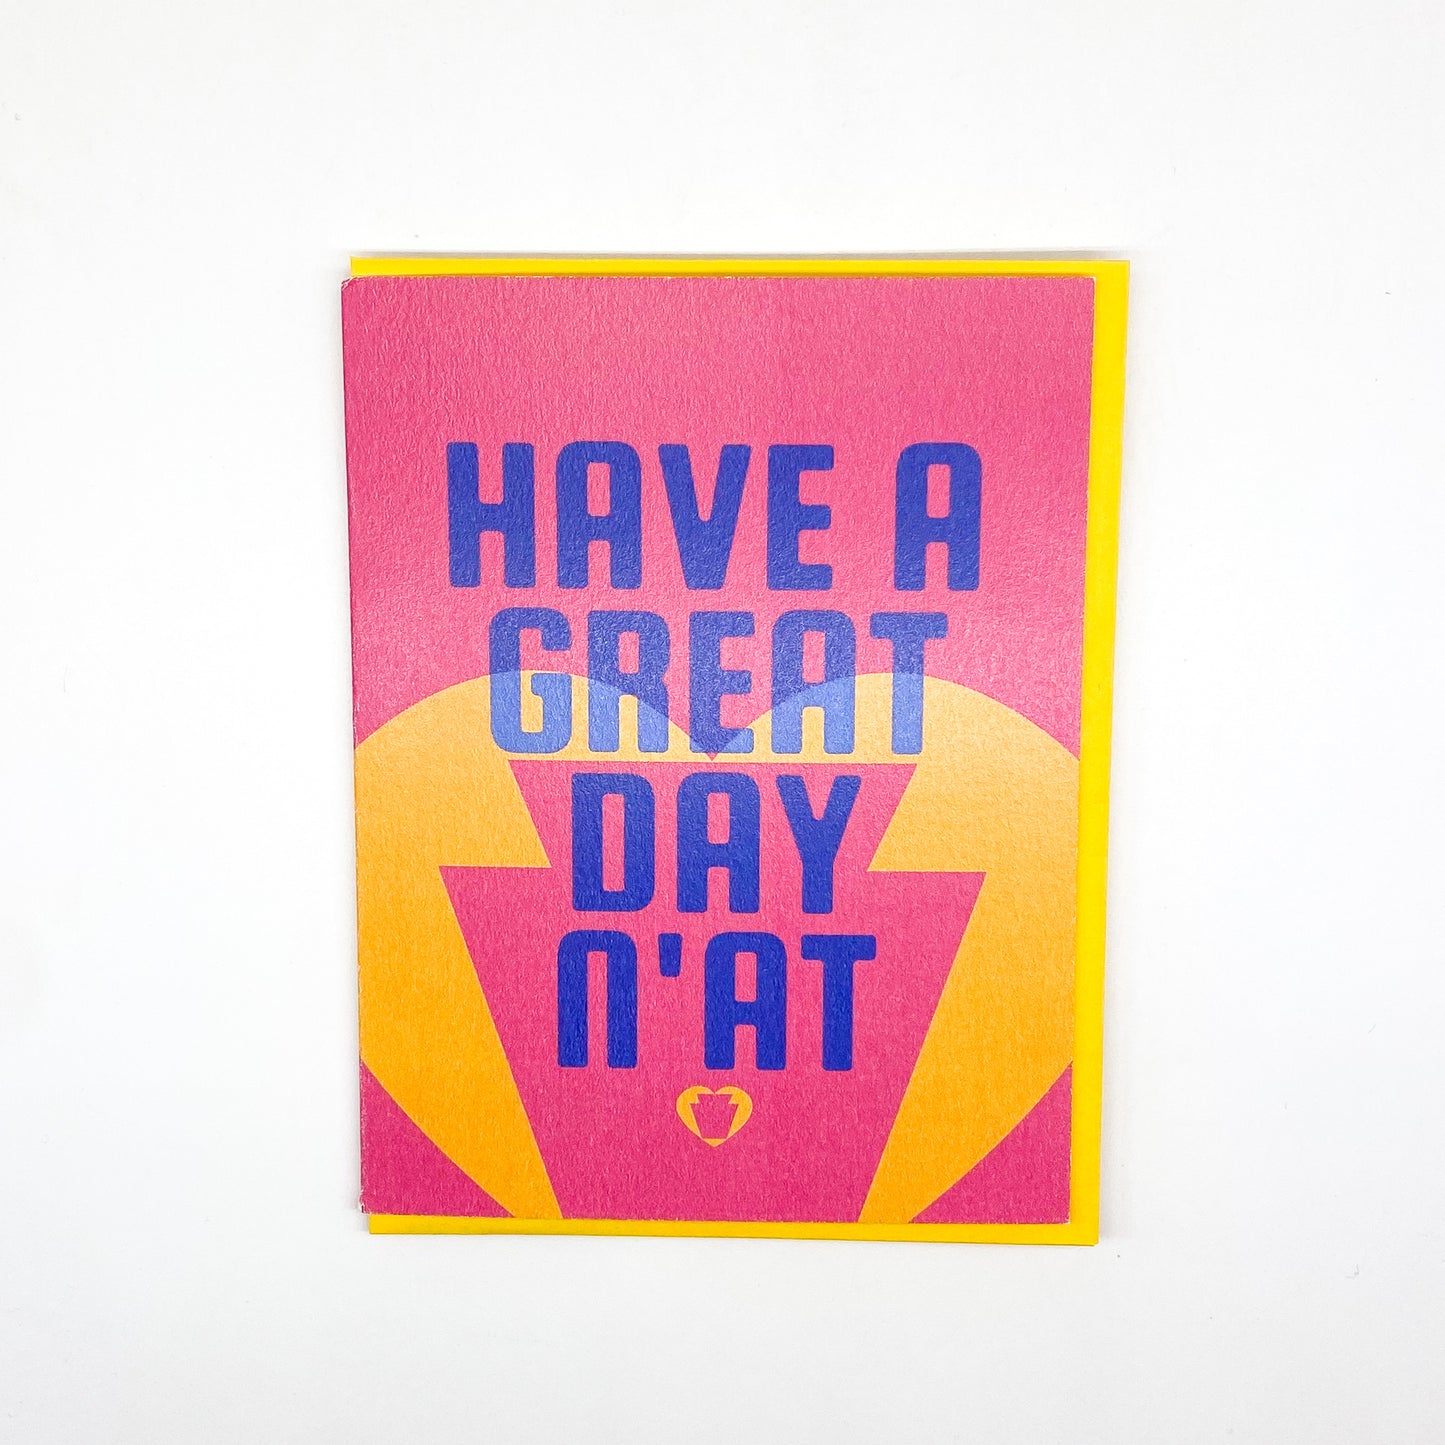 PGH Greetings - Have a Great Day N'at Card